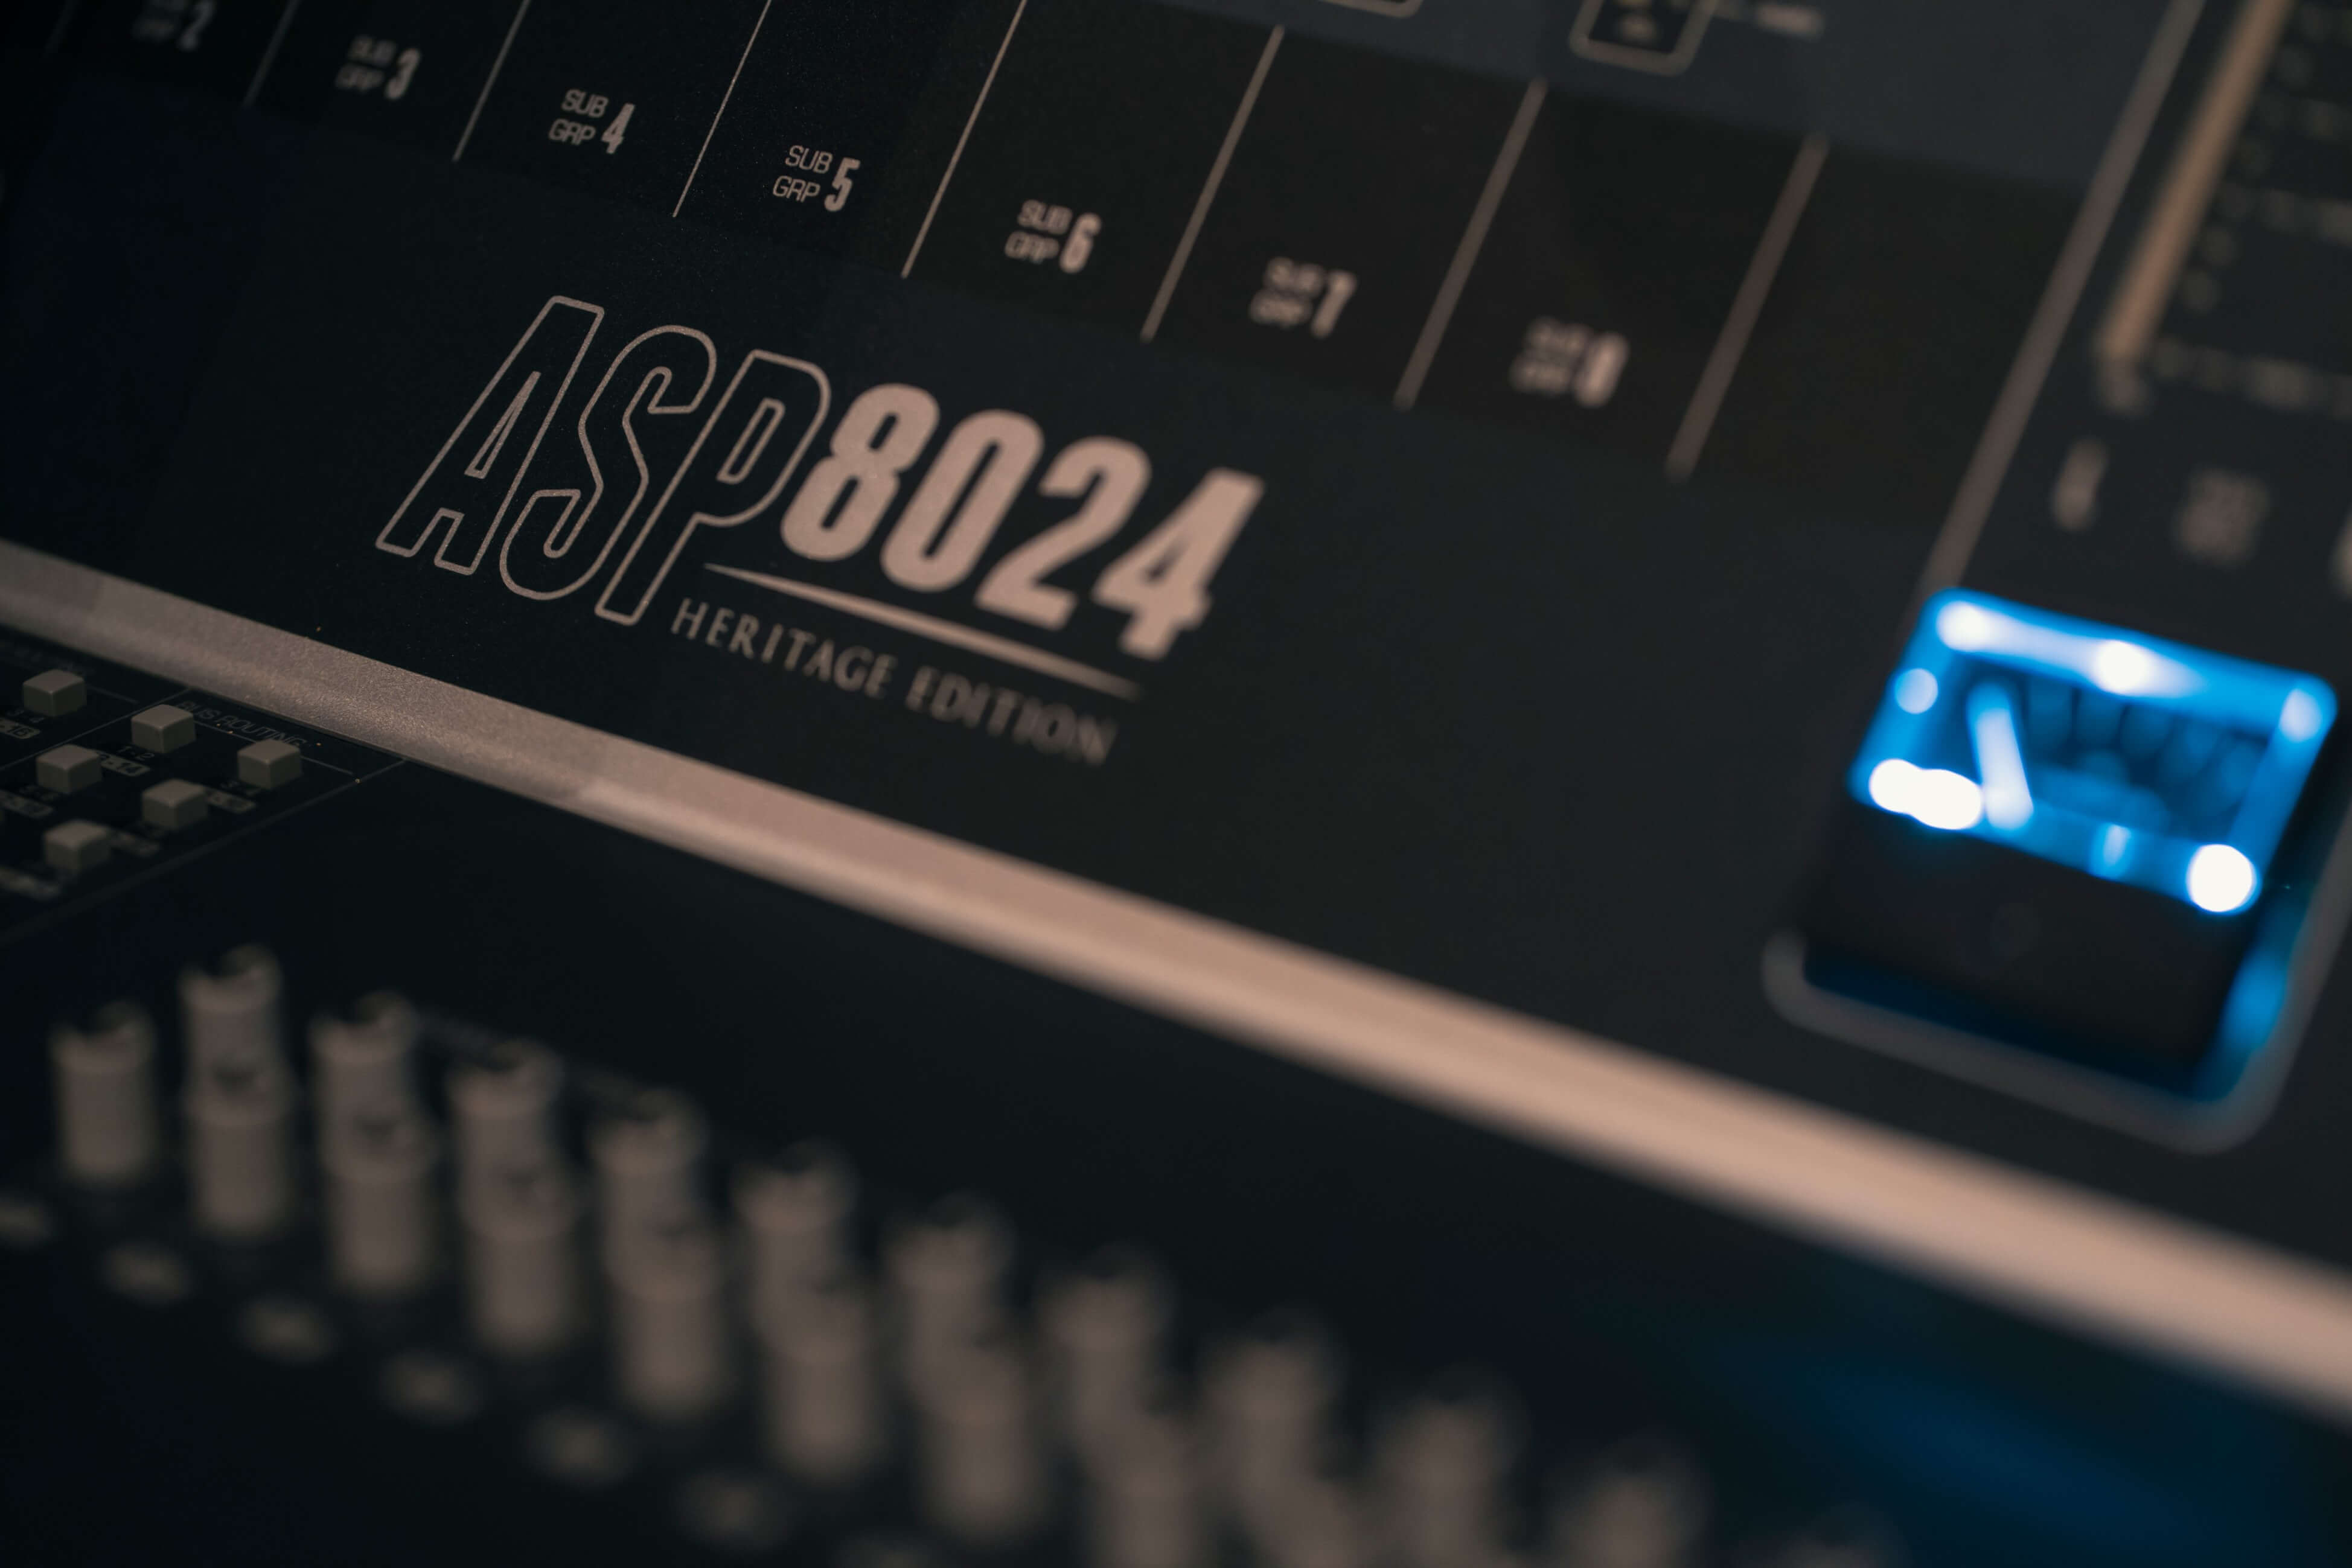 Audient ASP8024 Heritage Edition Analog Console